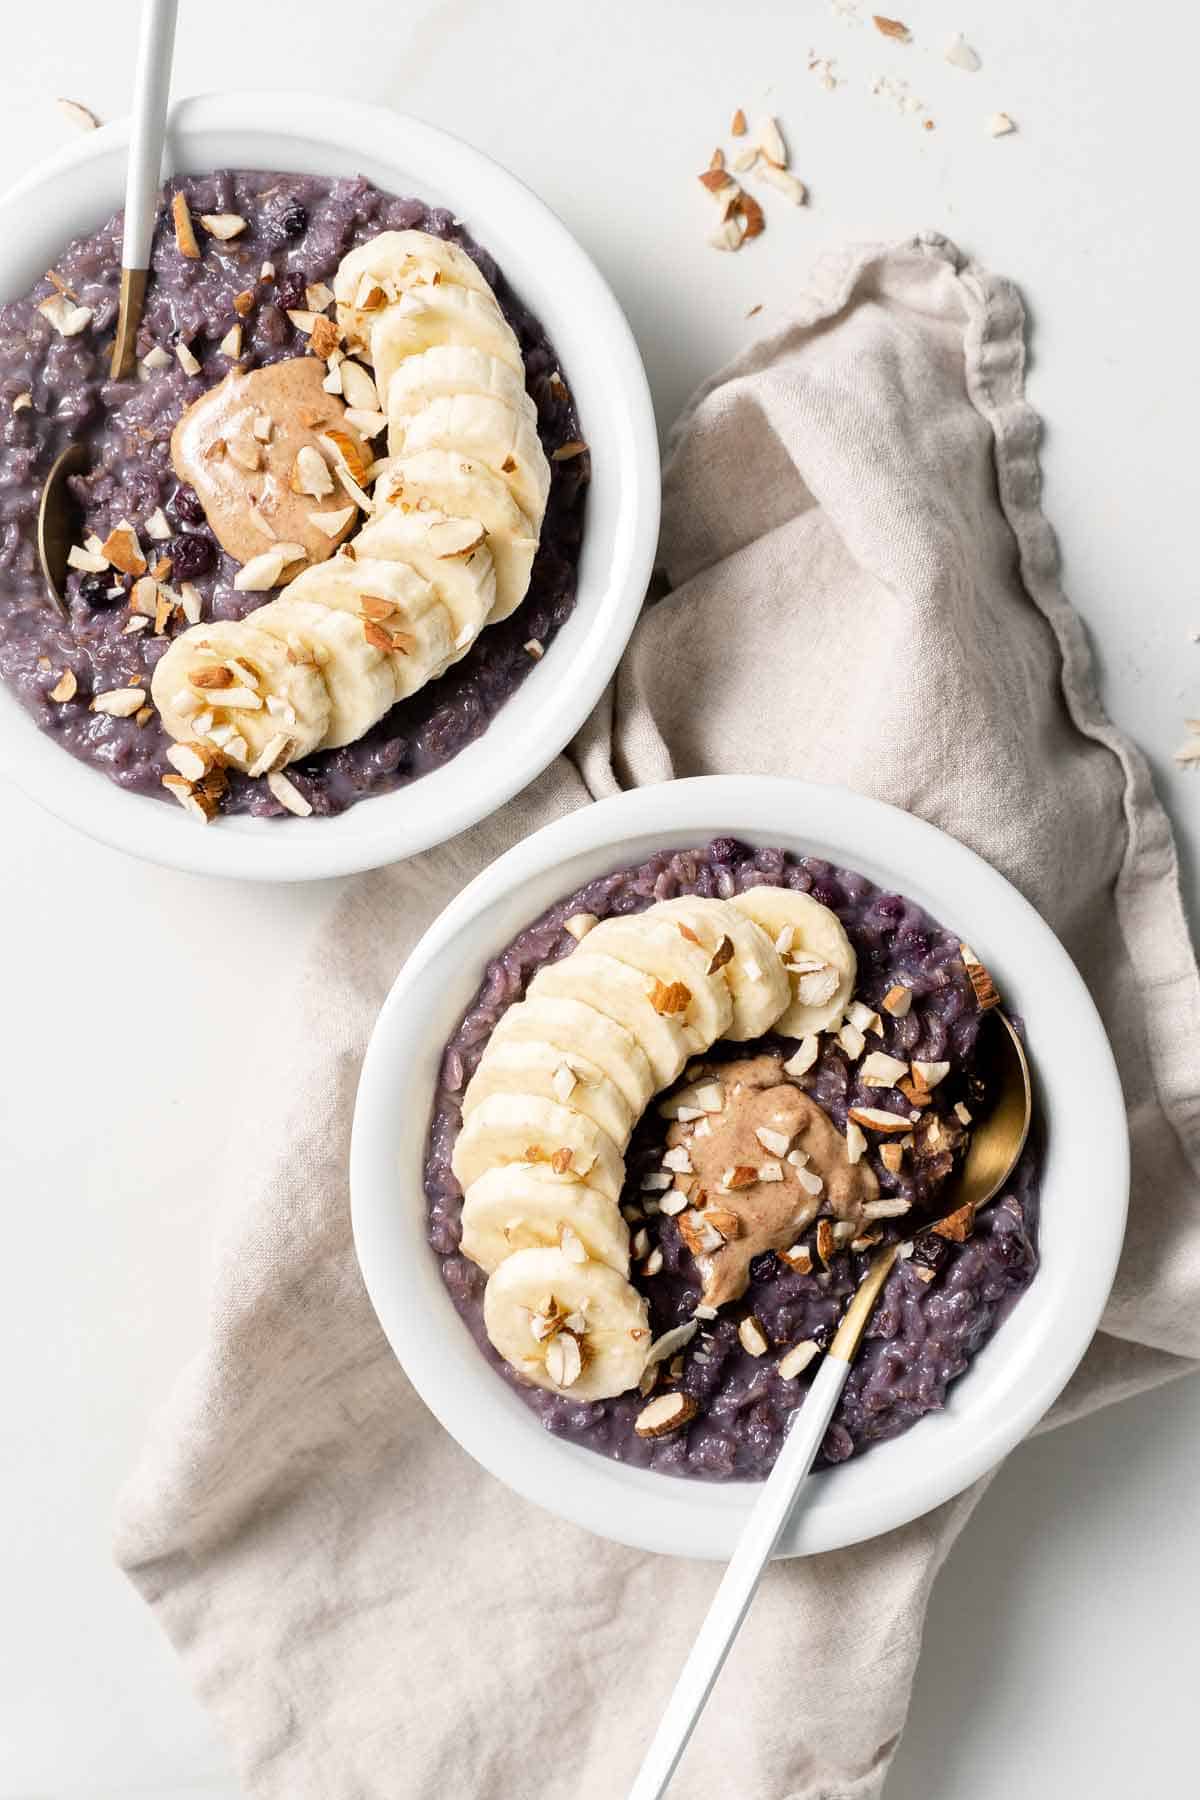 Overhead view of two bowls of blueberry oats with toppings.